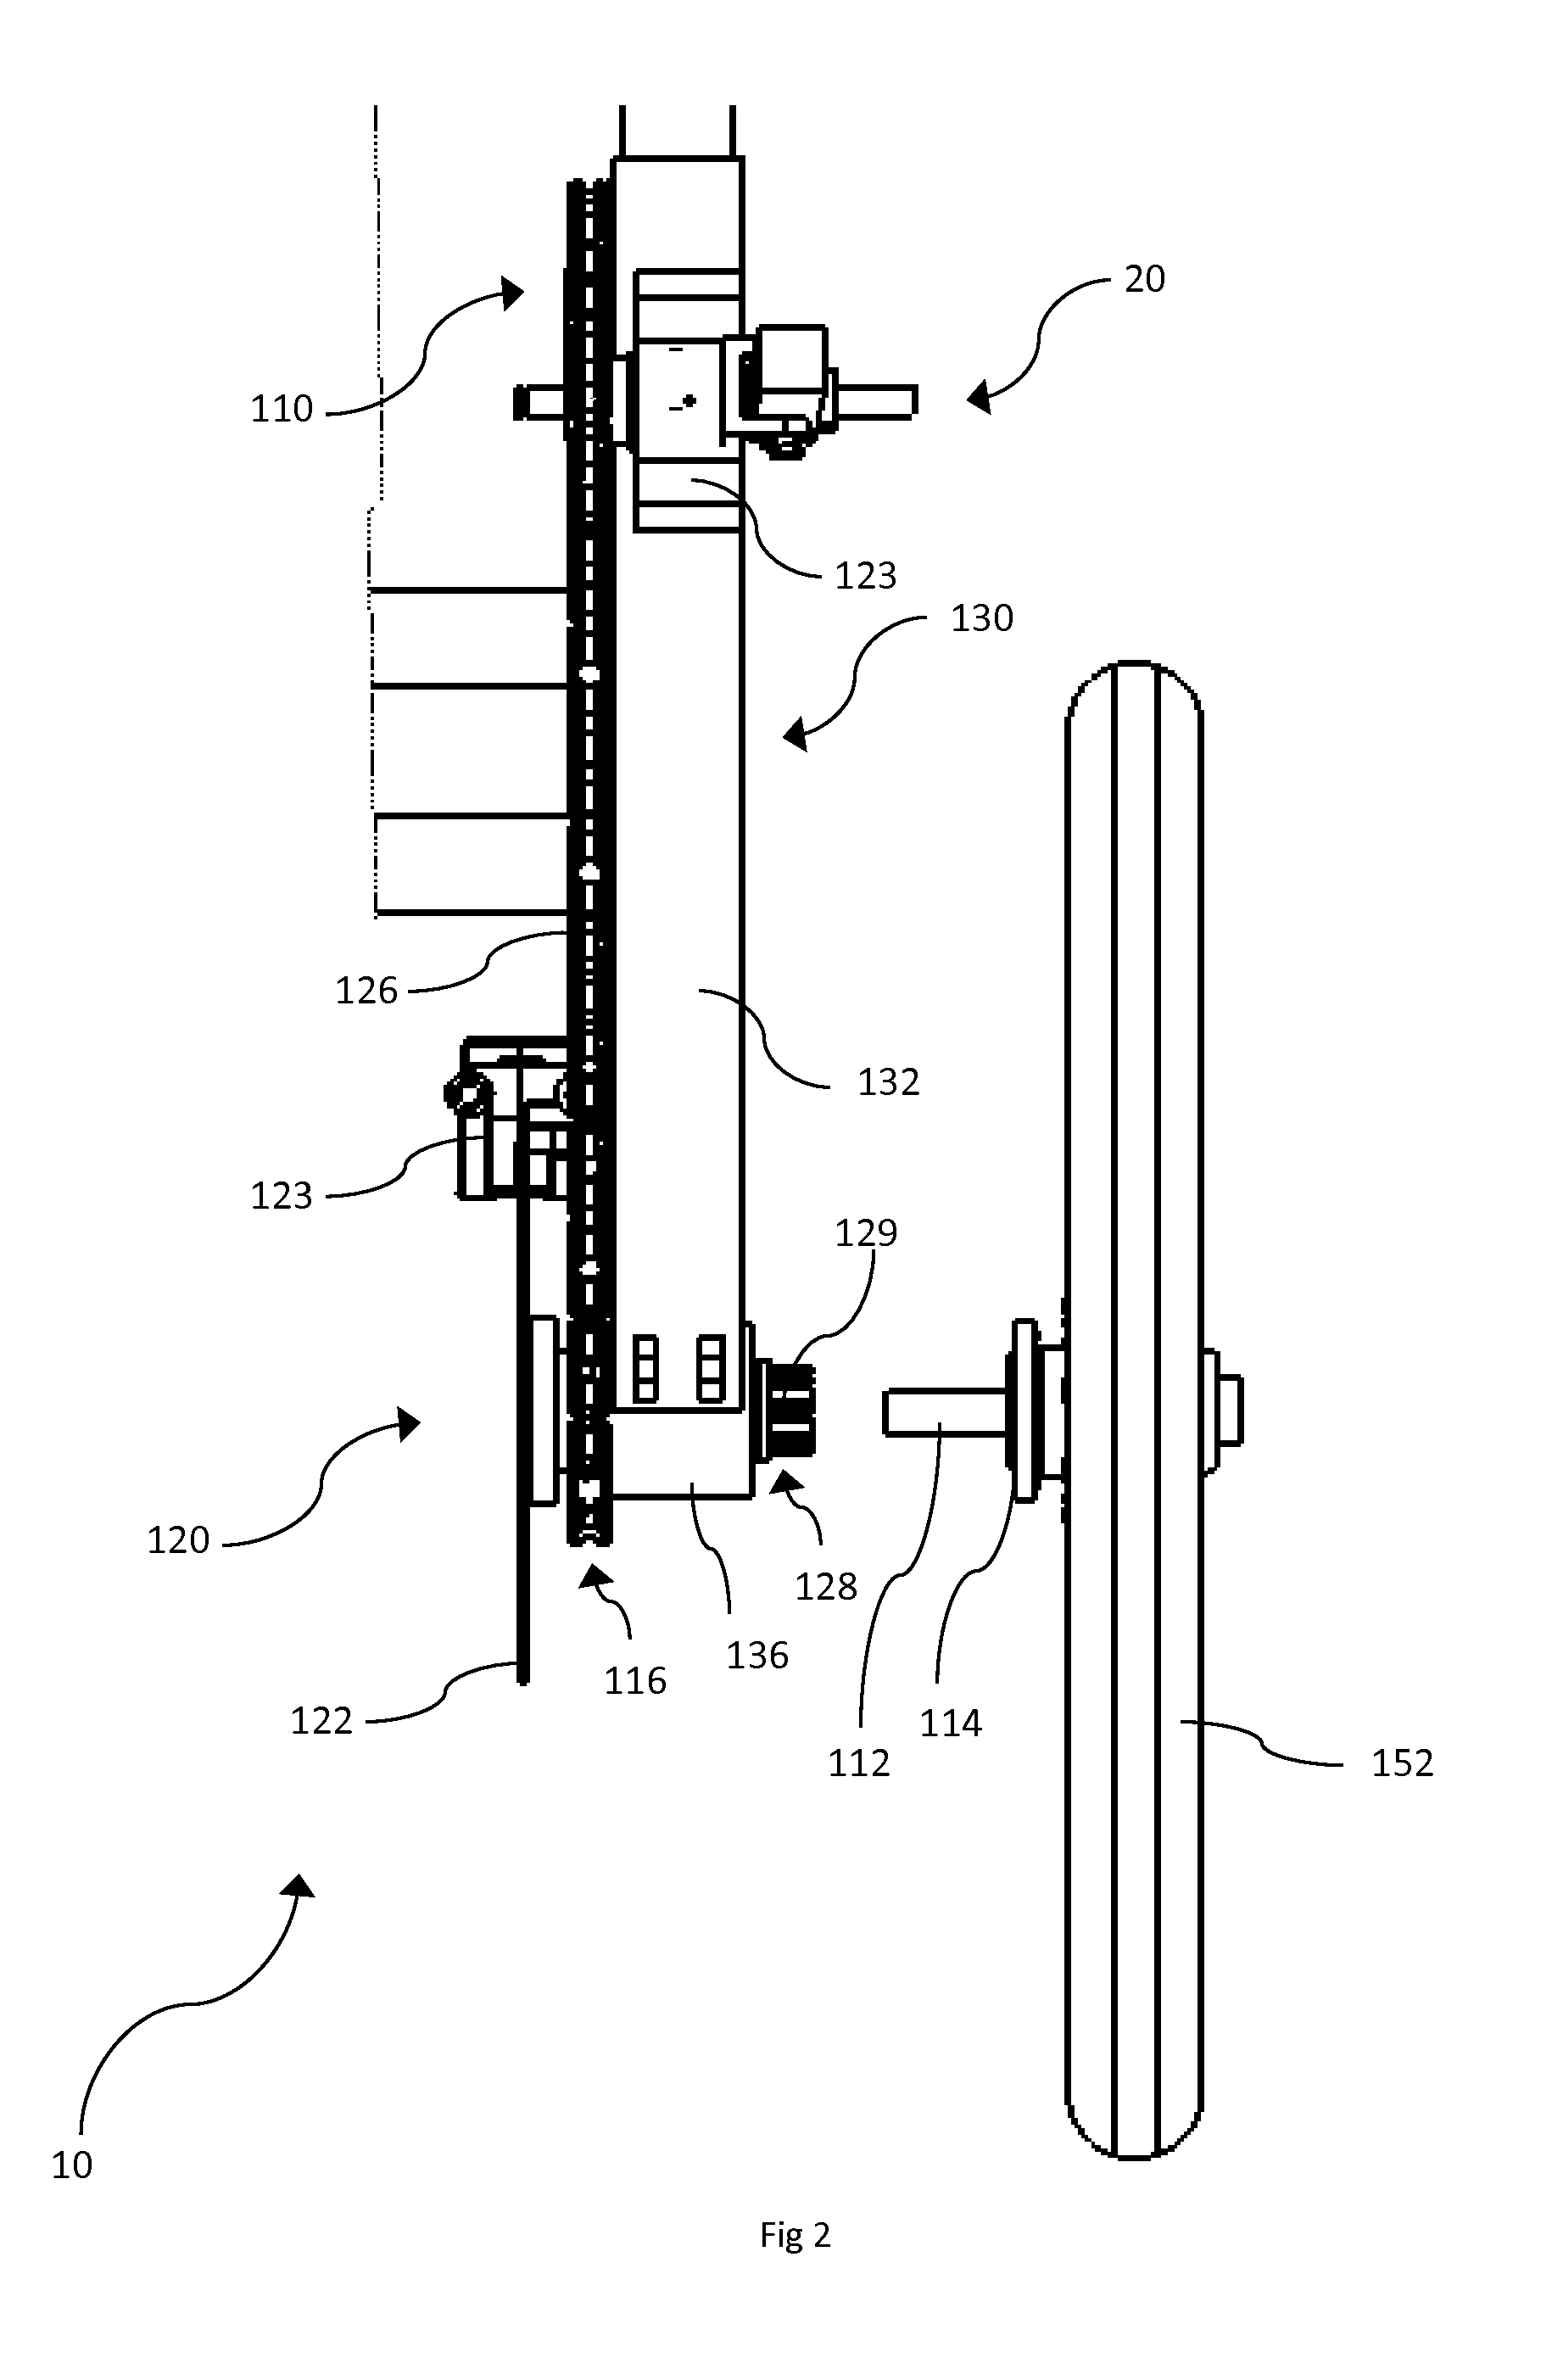 Multi-directional lever drive system